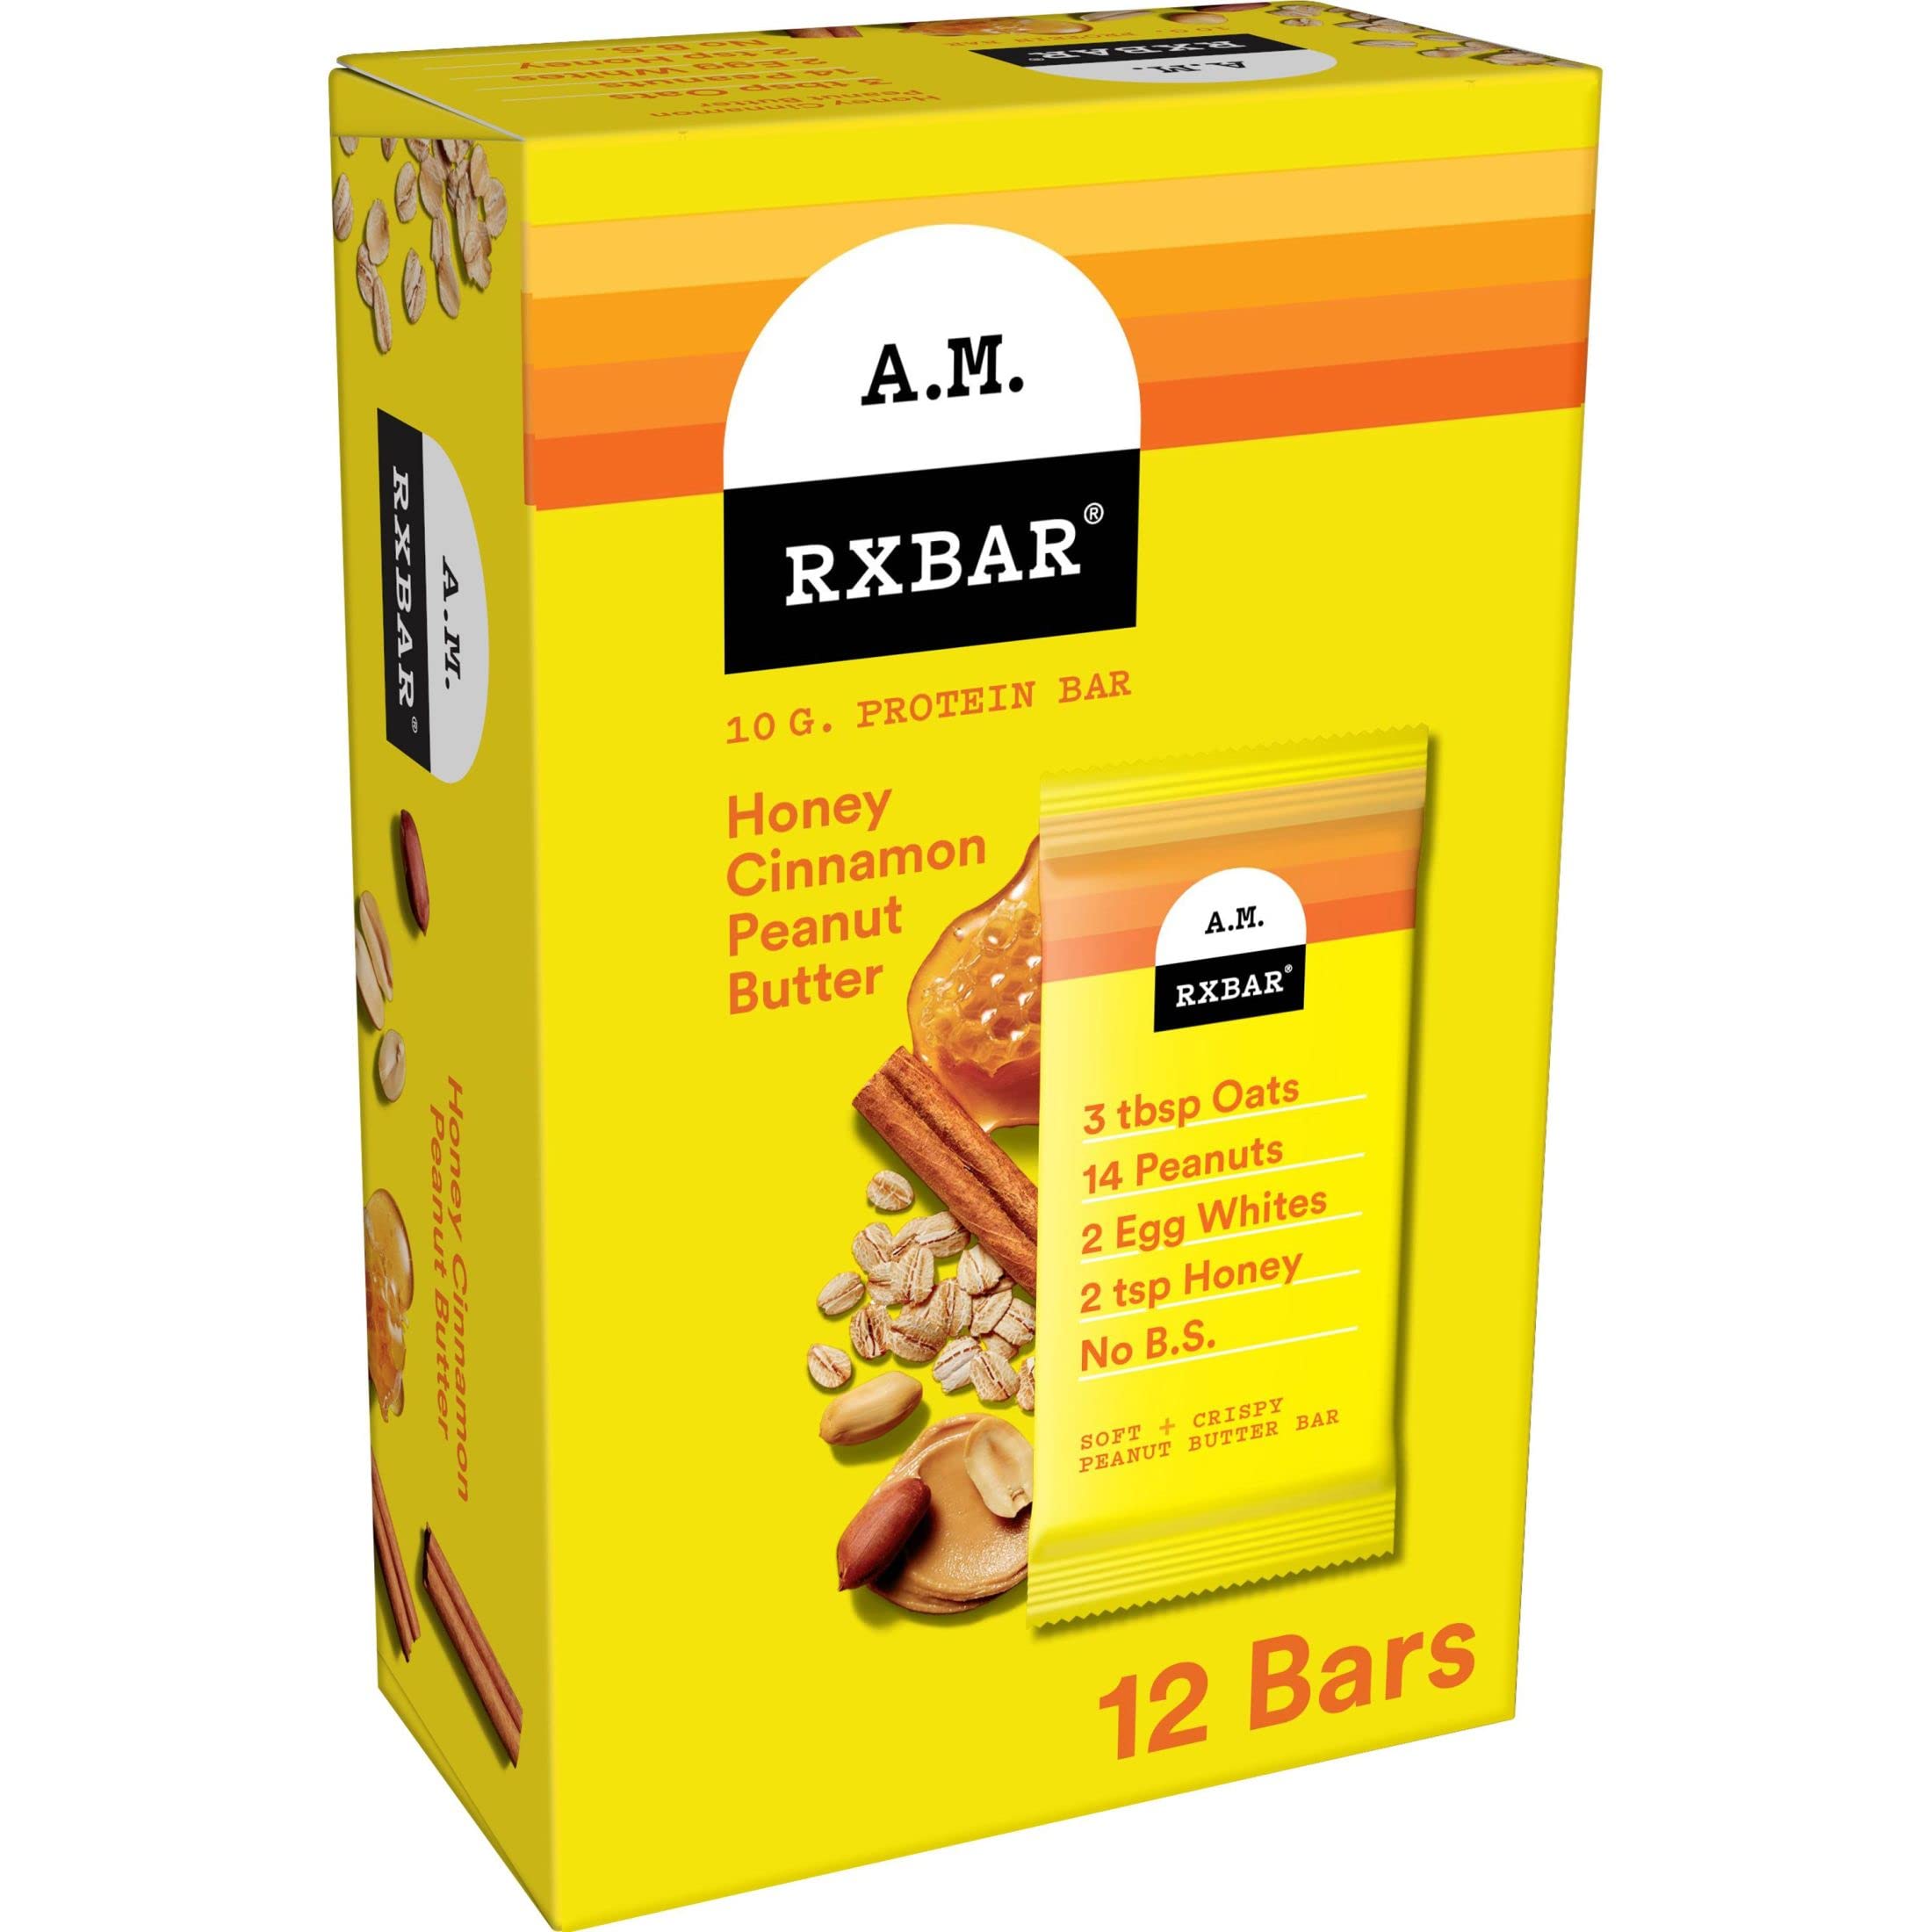 12-Count 1.9-Oz RXBAR A.M. Protein Bars (Honey Cinnamon Peanut Butter) $16.56 w/ S&S + Free Shipping w/ Prime or on $35+